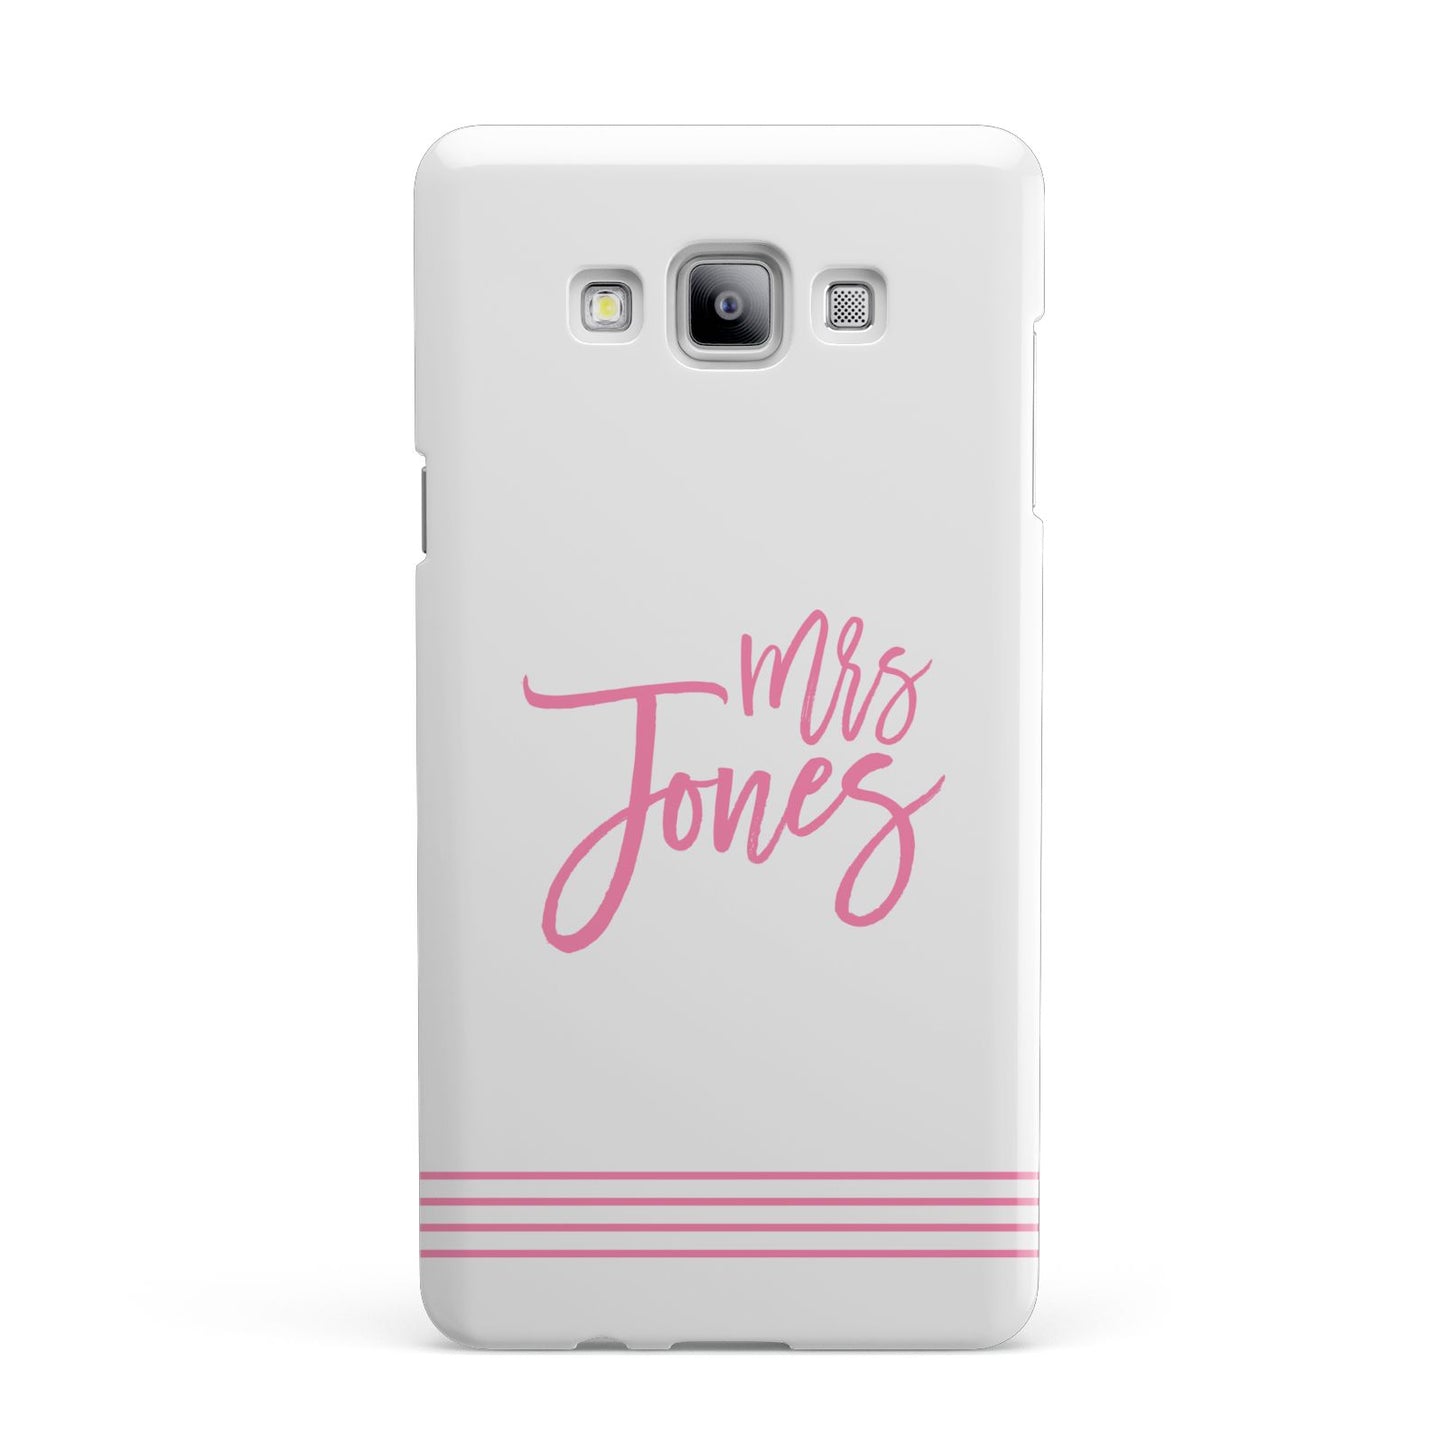 Personalised Hers Samsung Galaxy A7 2015 Case